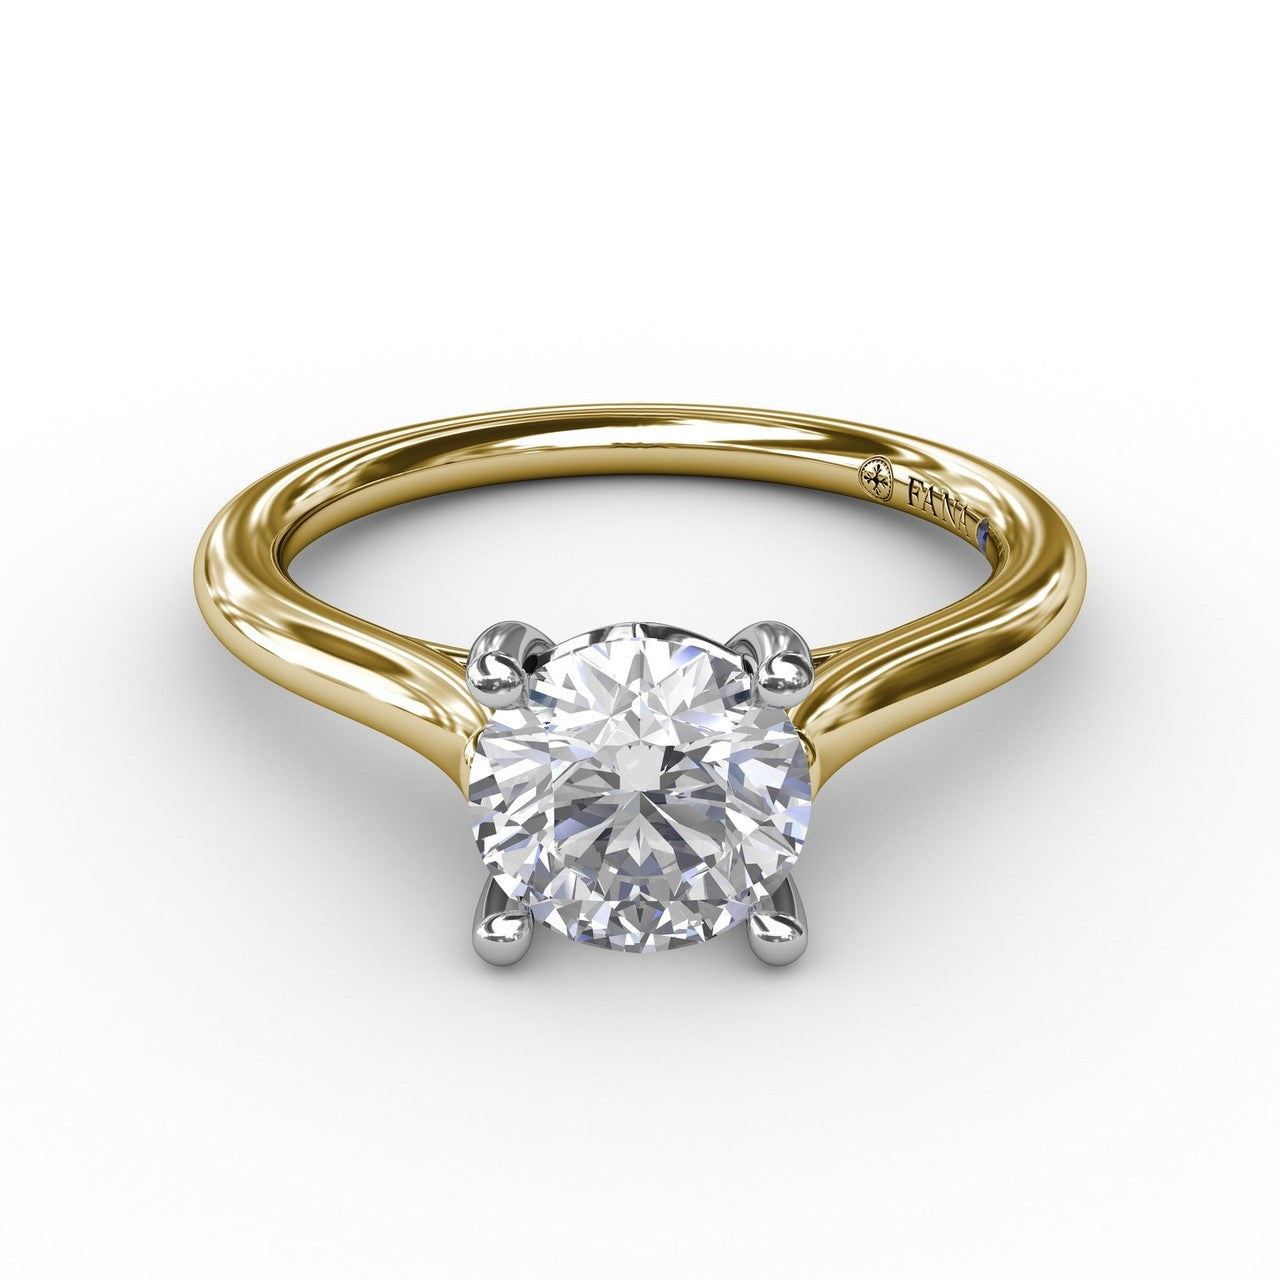 FANA 14KT Yellow Gold Solitaire Diamond Engagement Ring S4014/YG 1.5CT